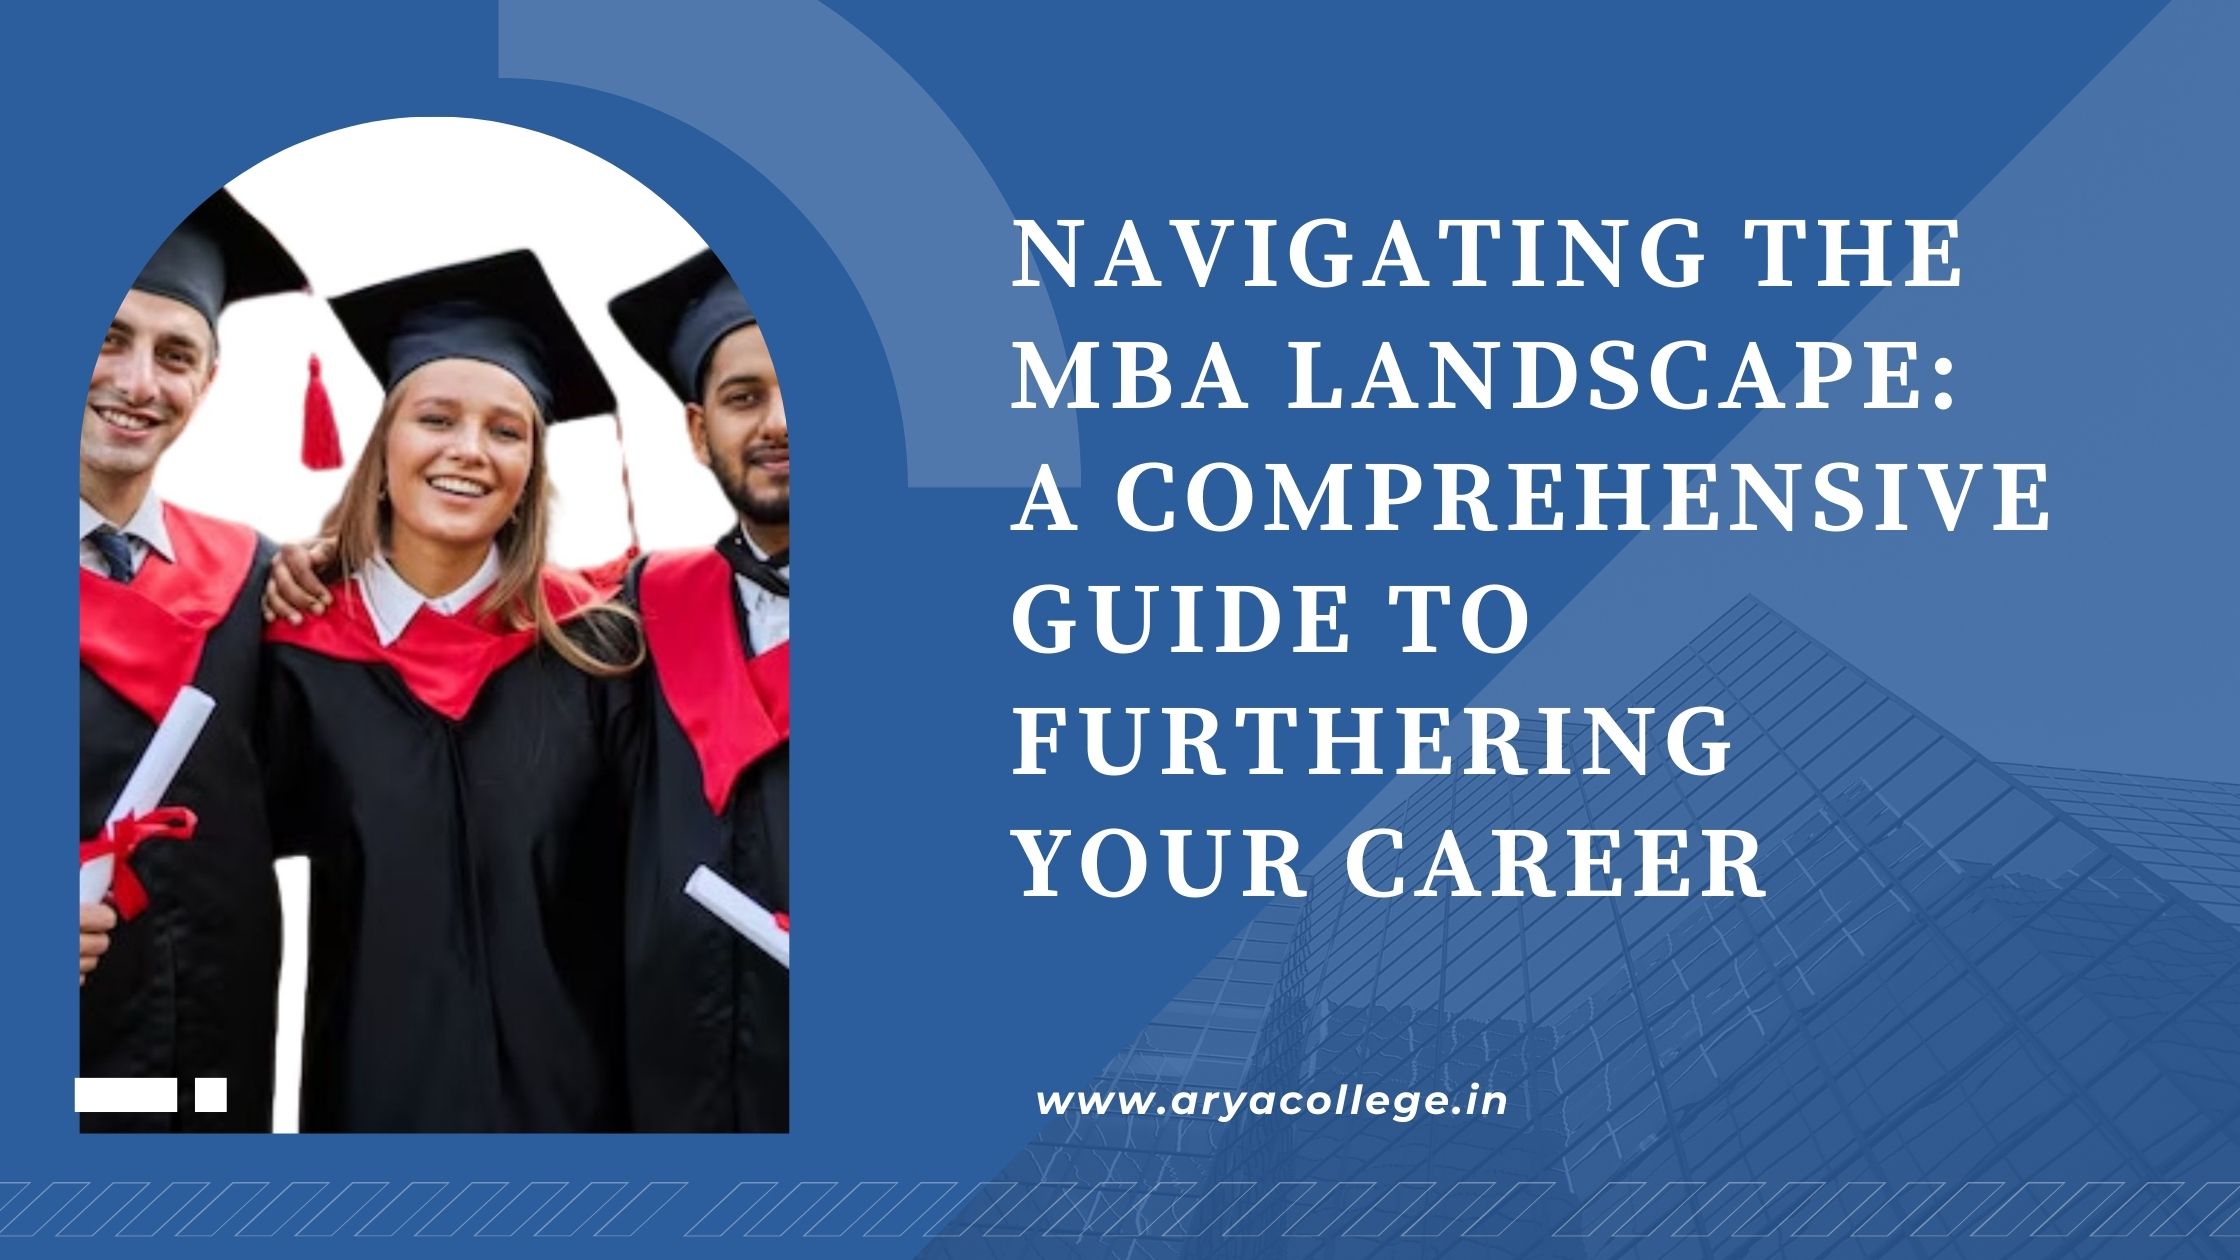 Navigating the MBA Landscape: A Comprehensive Guide to Furthering Your Career